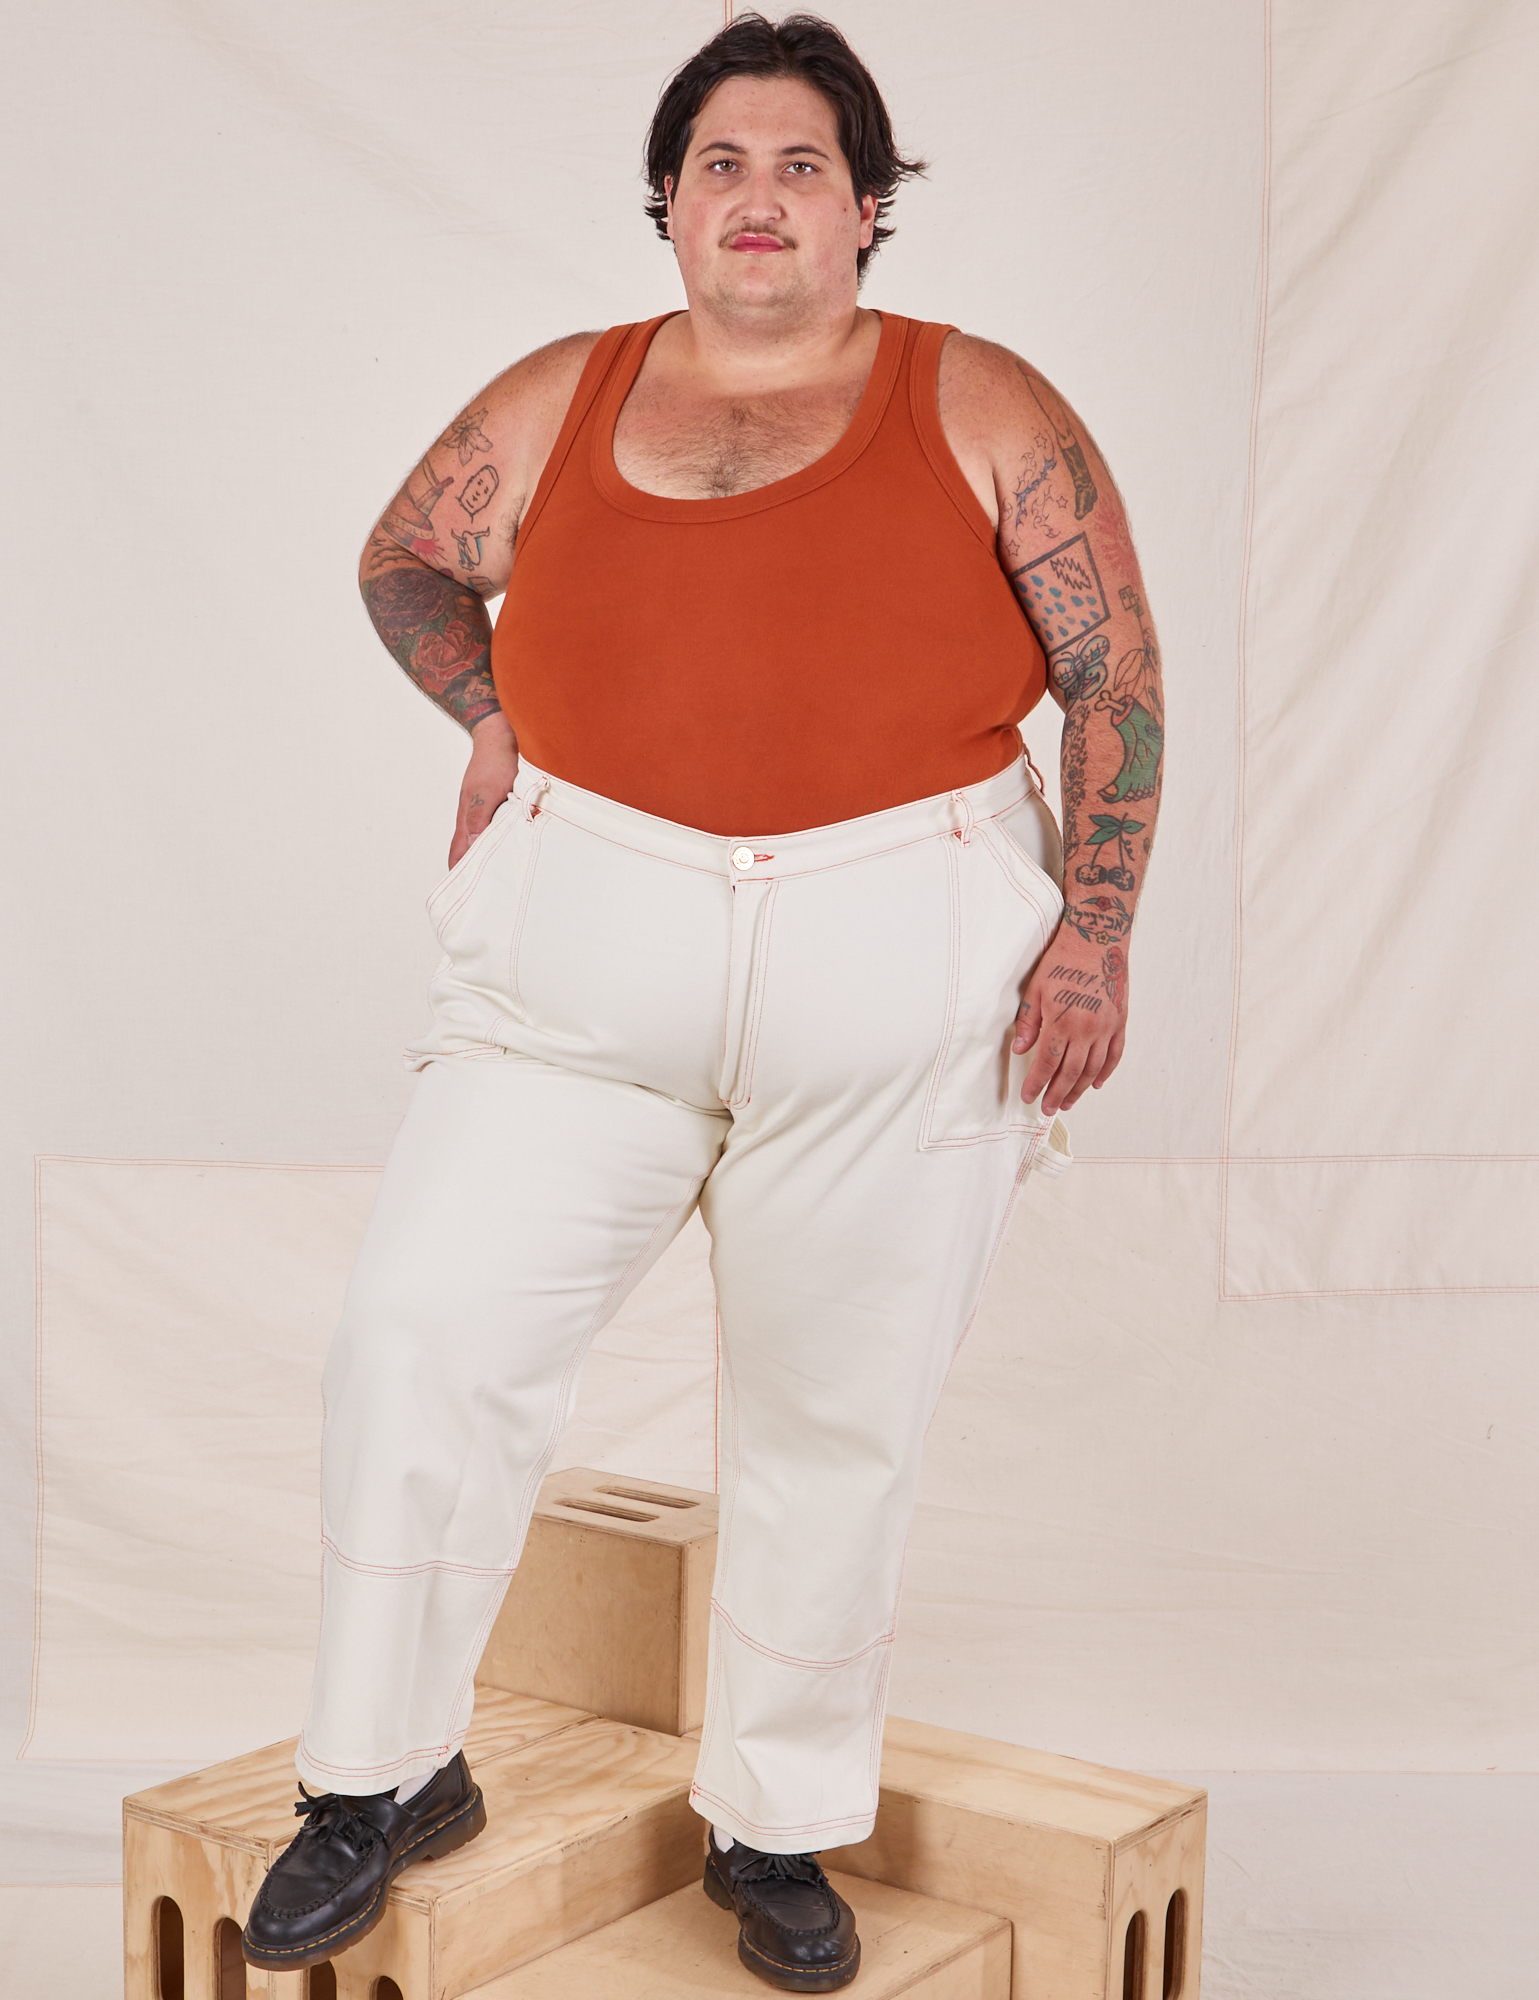 Sam is 5'10" and wearing 3XL Carpenter Jeans in Vintage Tee Off-White paired with burnt terracotta Cropped Tank Top